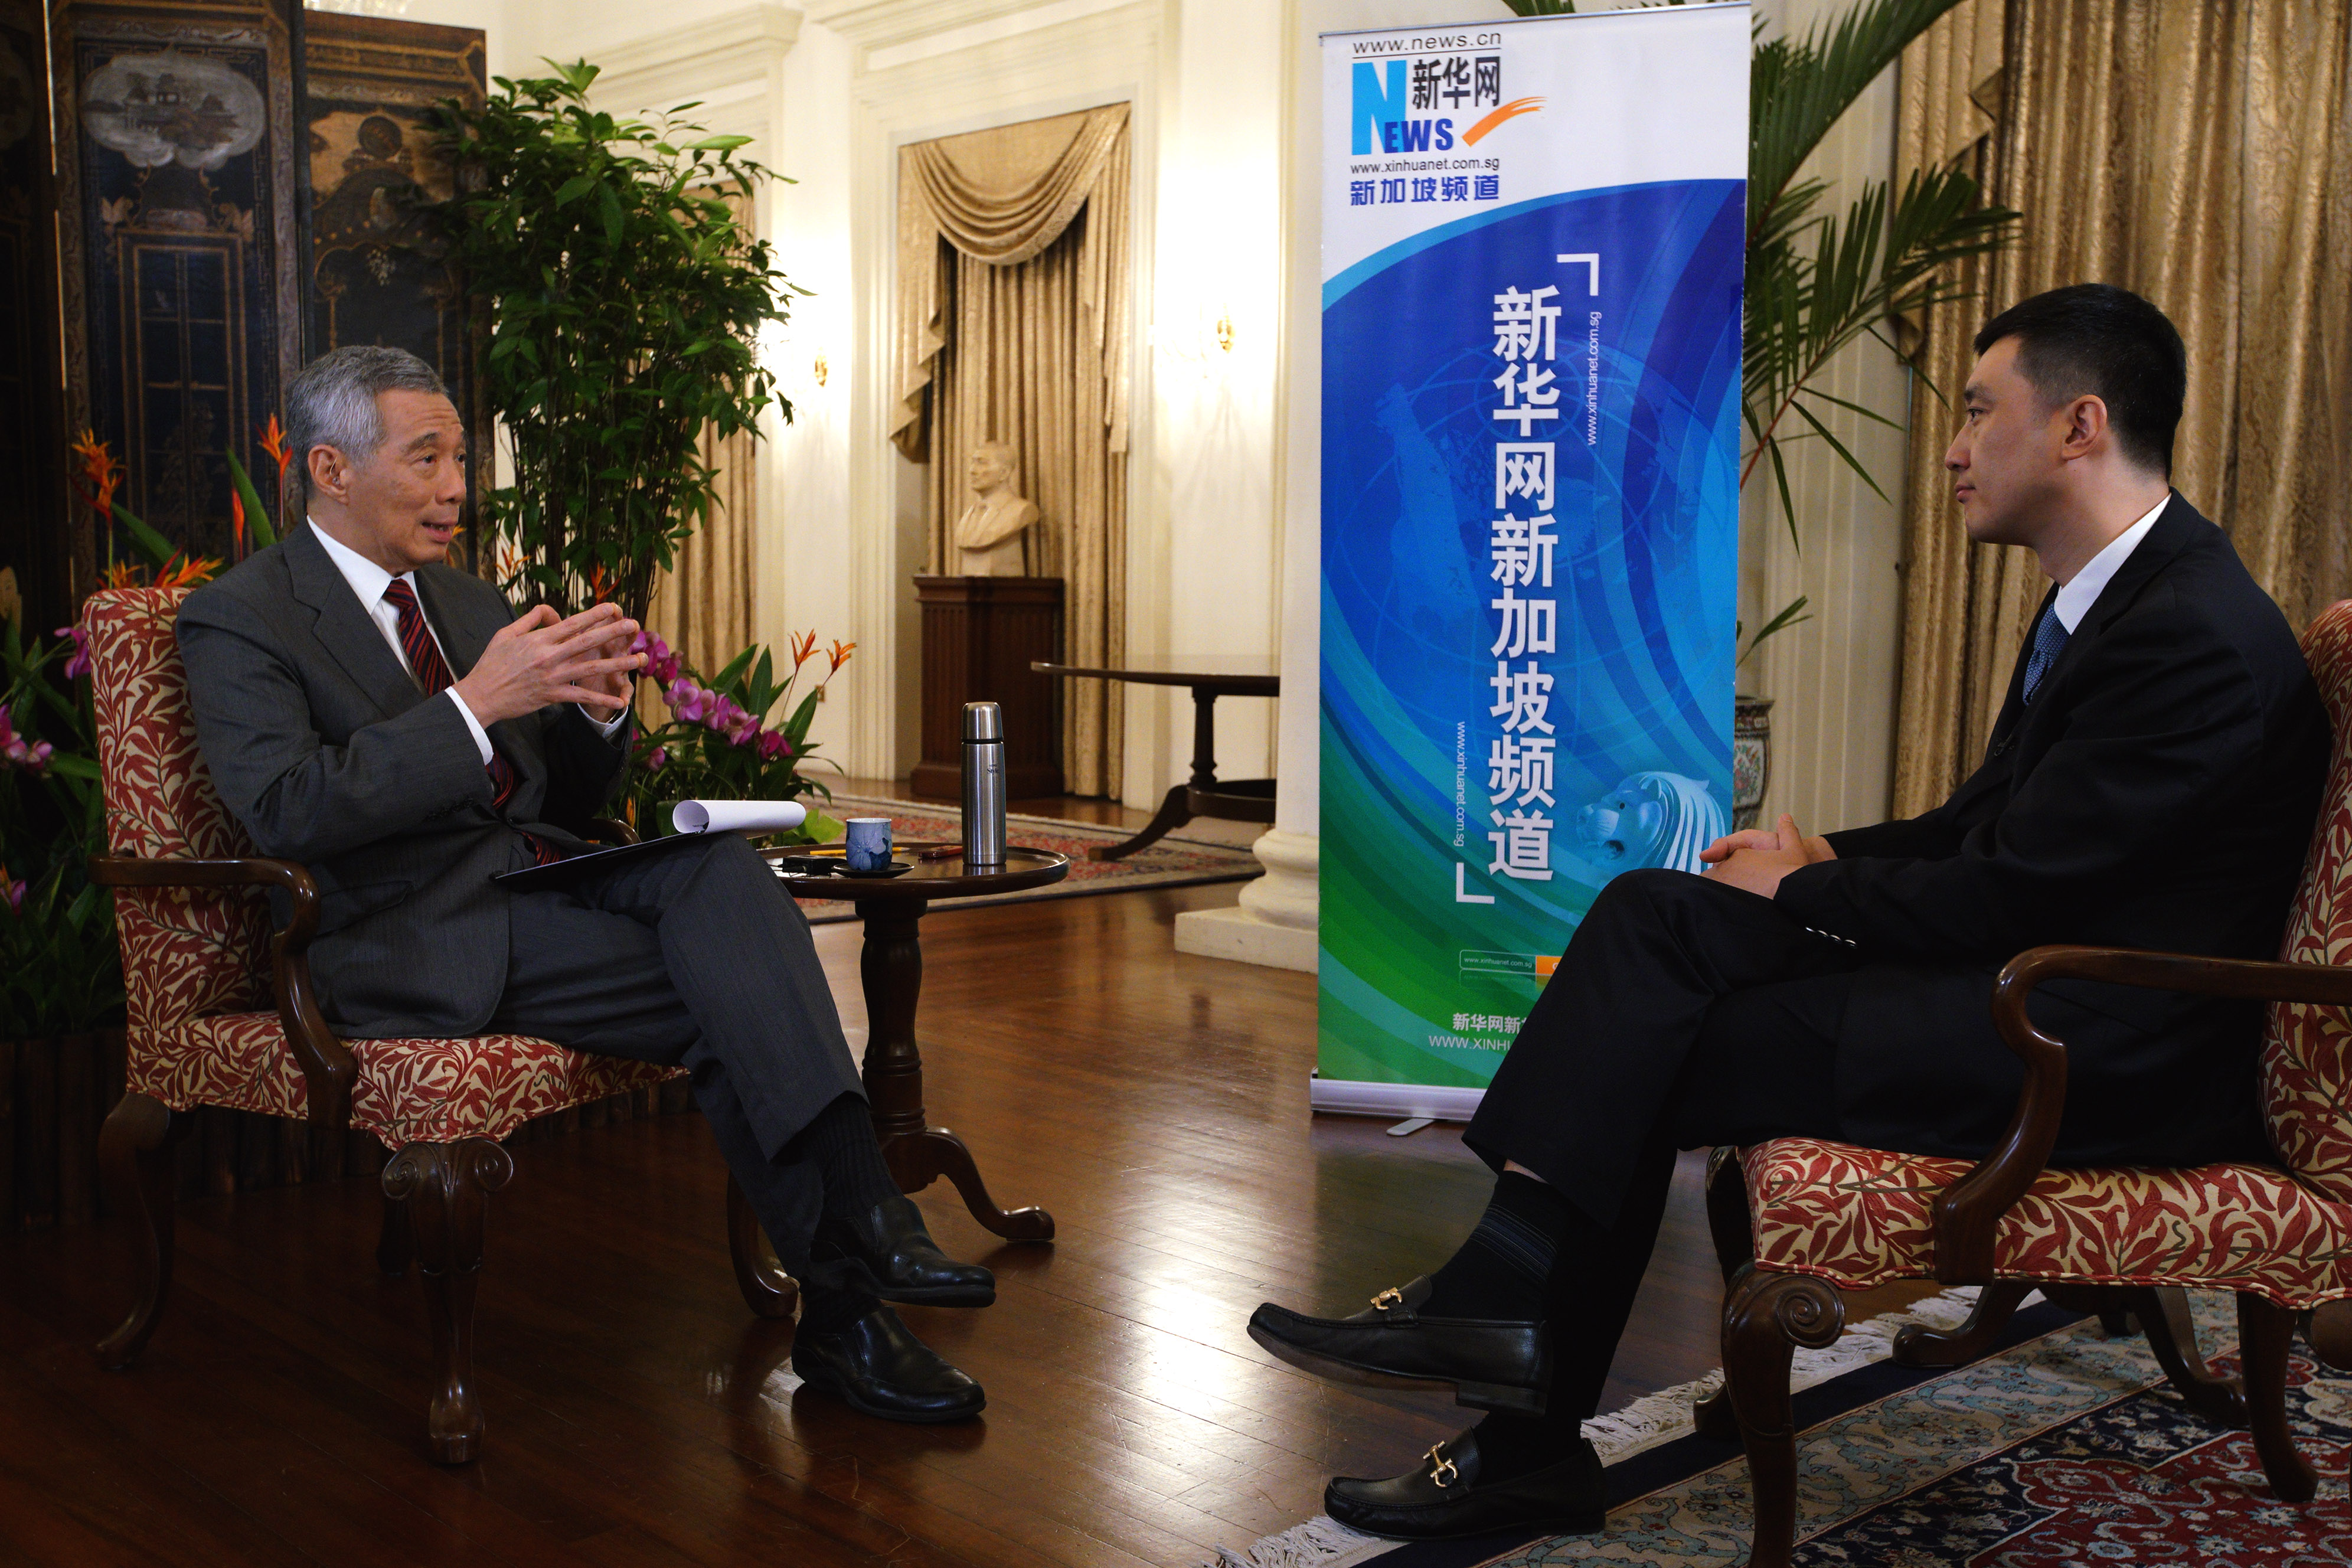 PM Lee Hsien Loong's Interview with Xinhuanet on 16 Sep 2017 (MCI Photo by LH Goh)